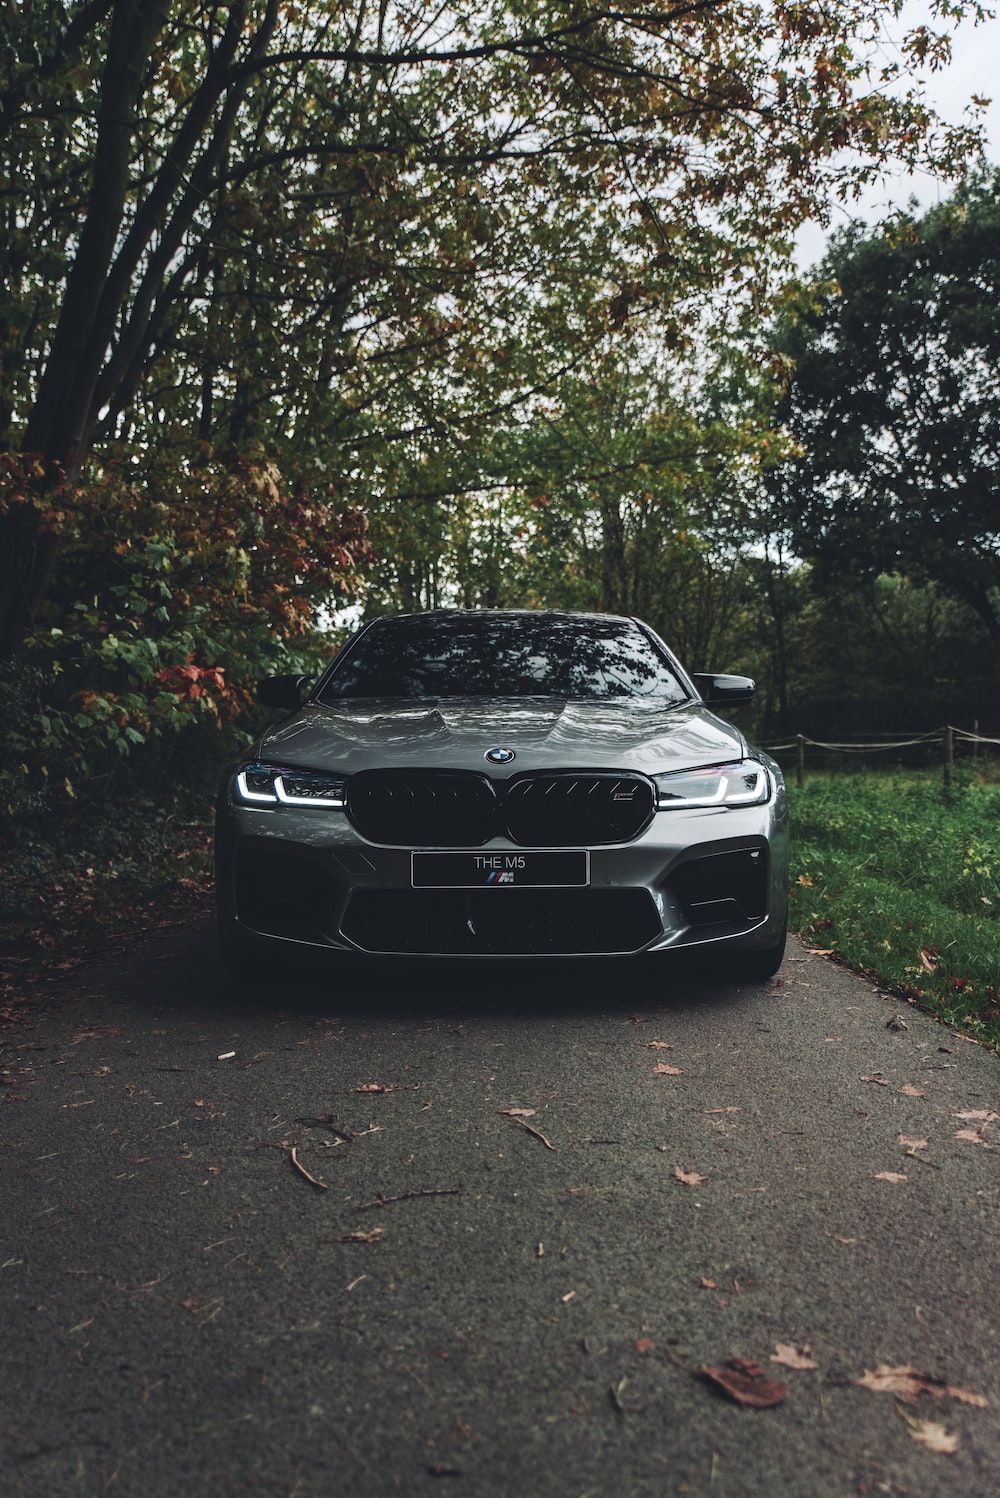 A car is parked on the side of road - BMW